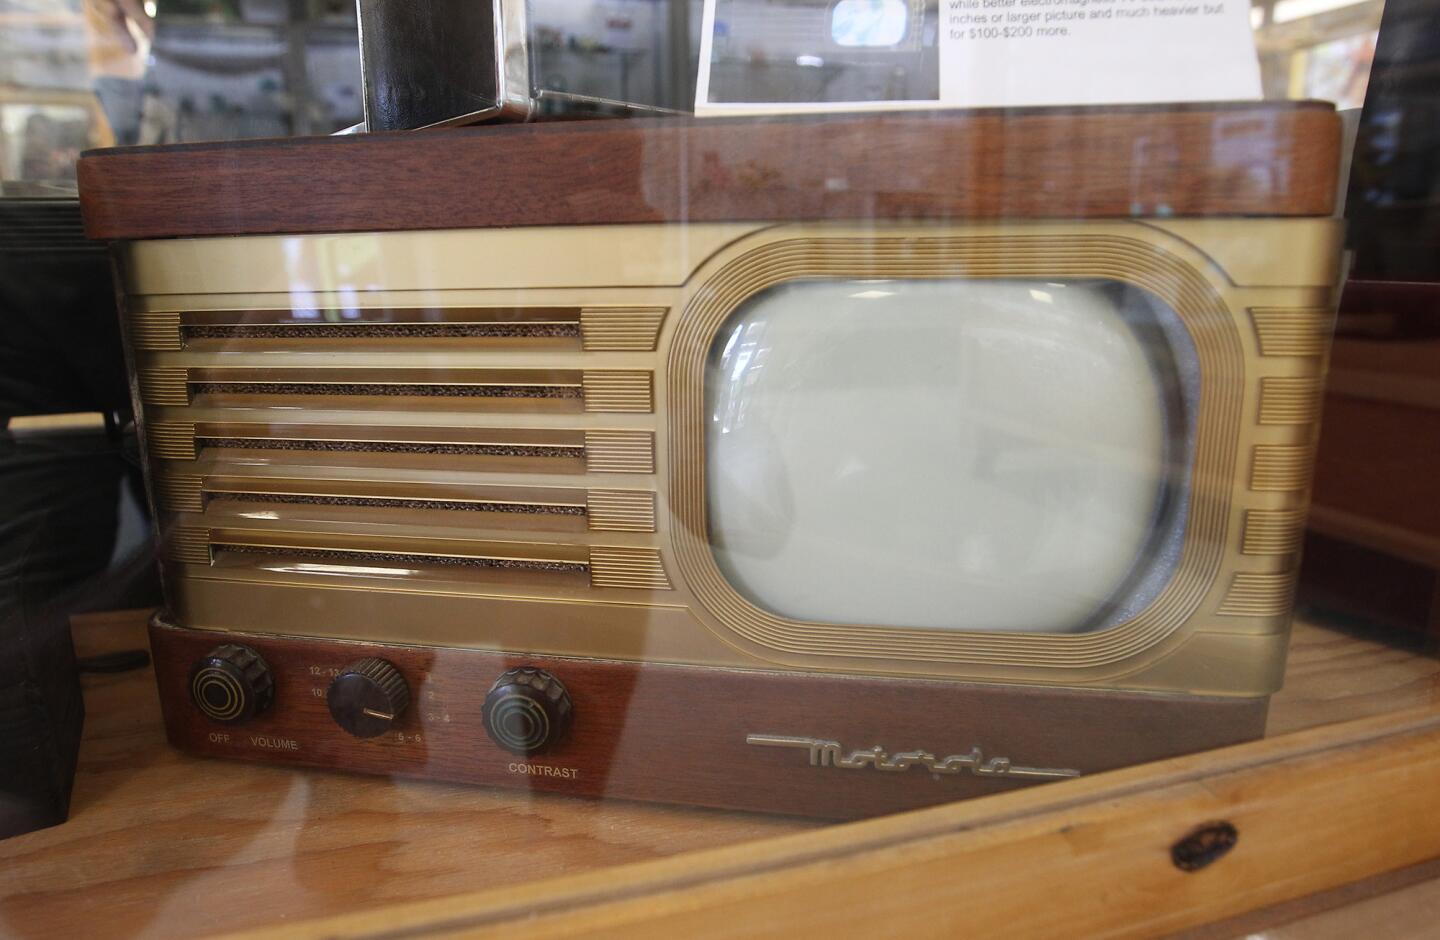 Collector rescues old radios